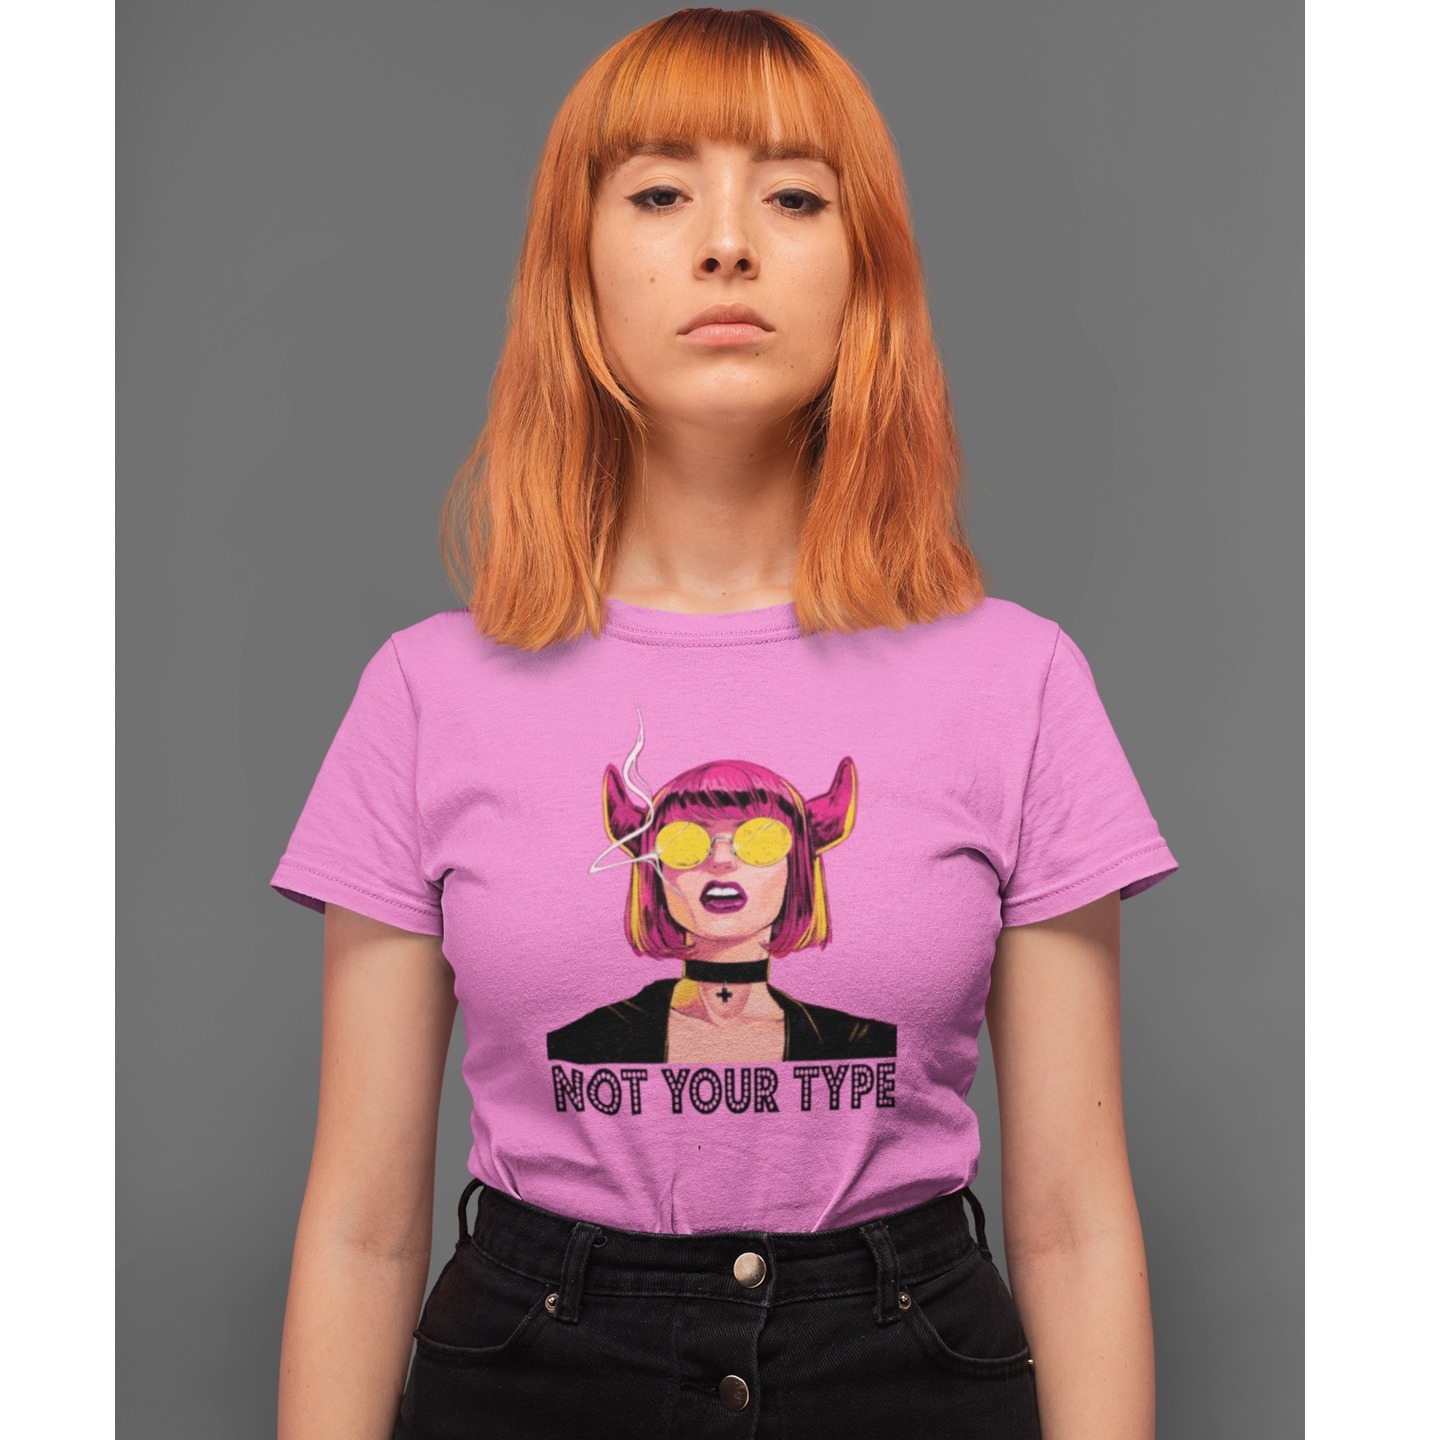 Not Your Type T-Shirt